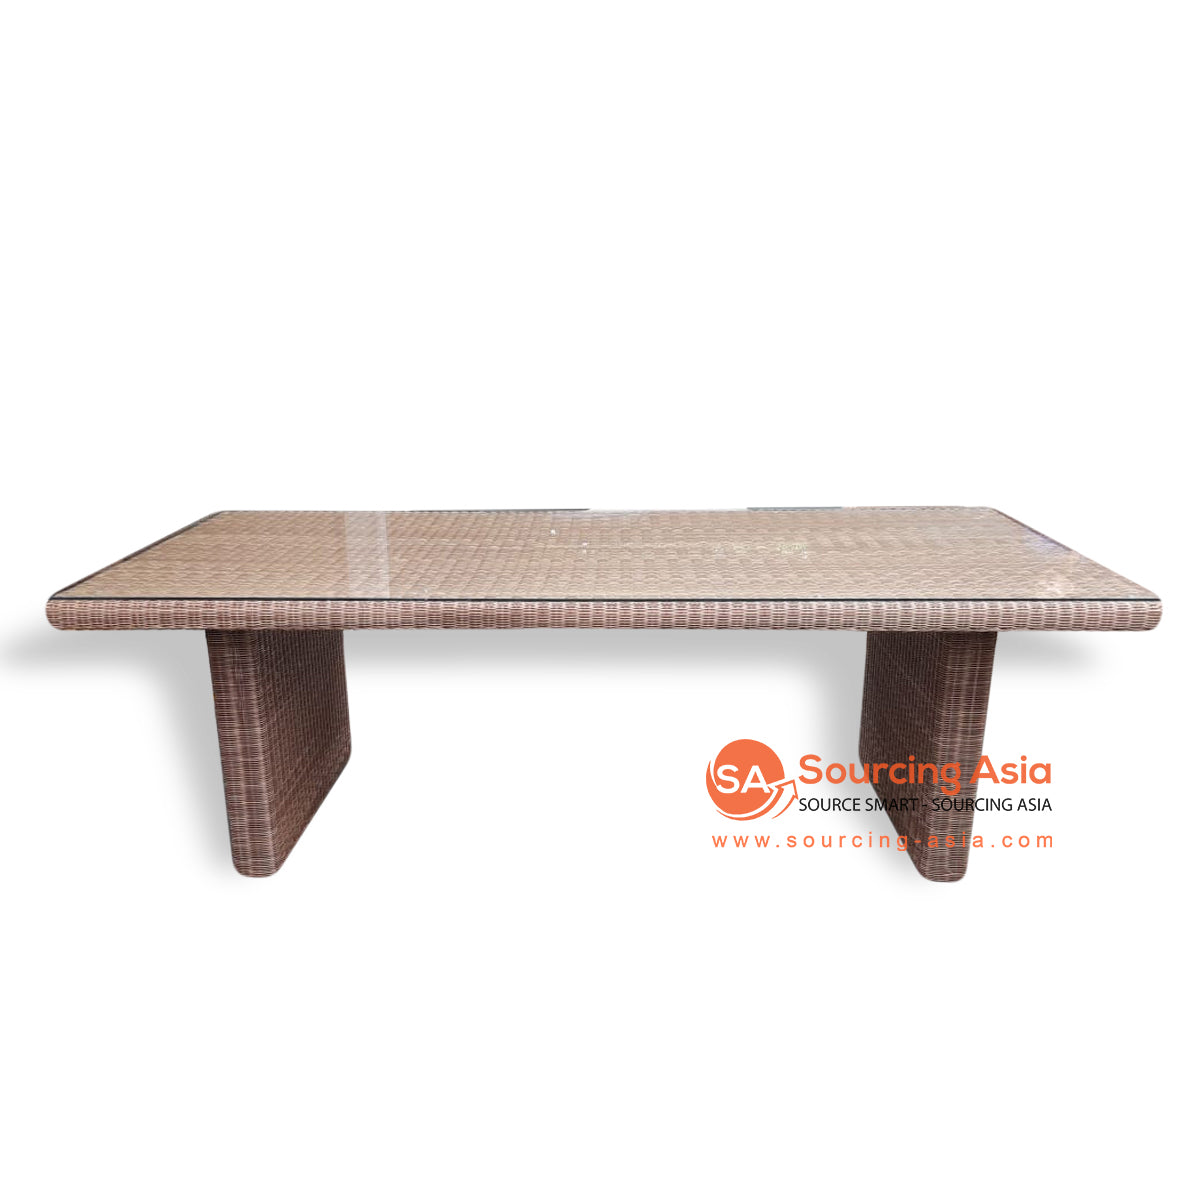 DJO028 NATURAL SYNTHETIC RATTAN OUTDOOR DINING TABLE